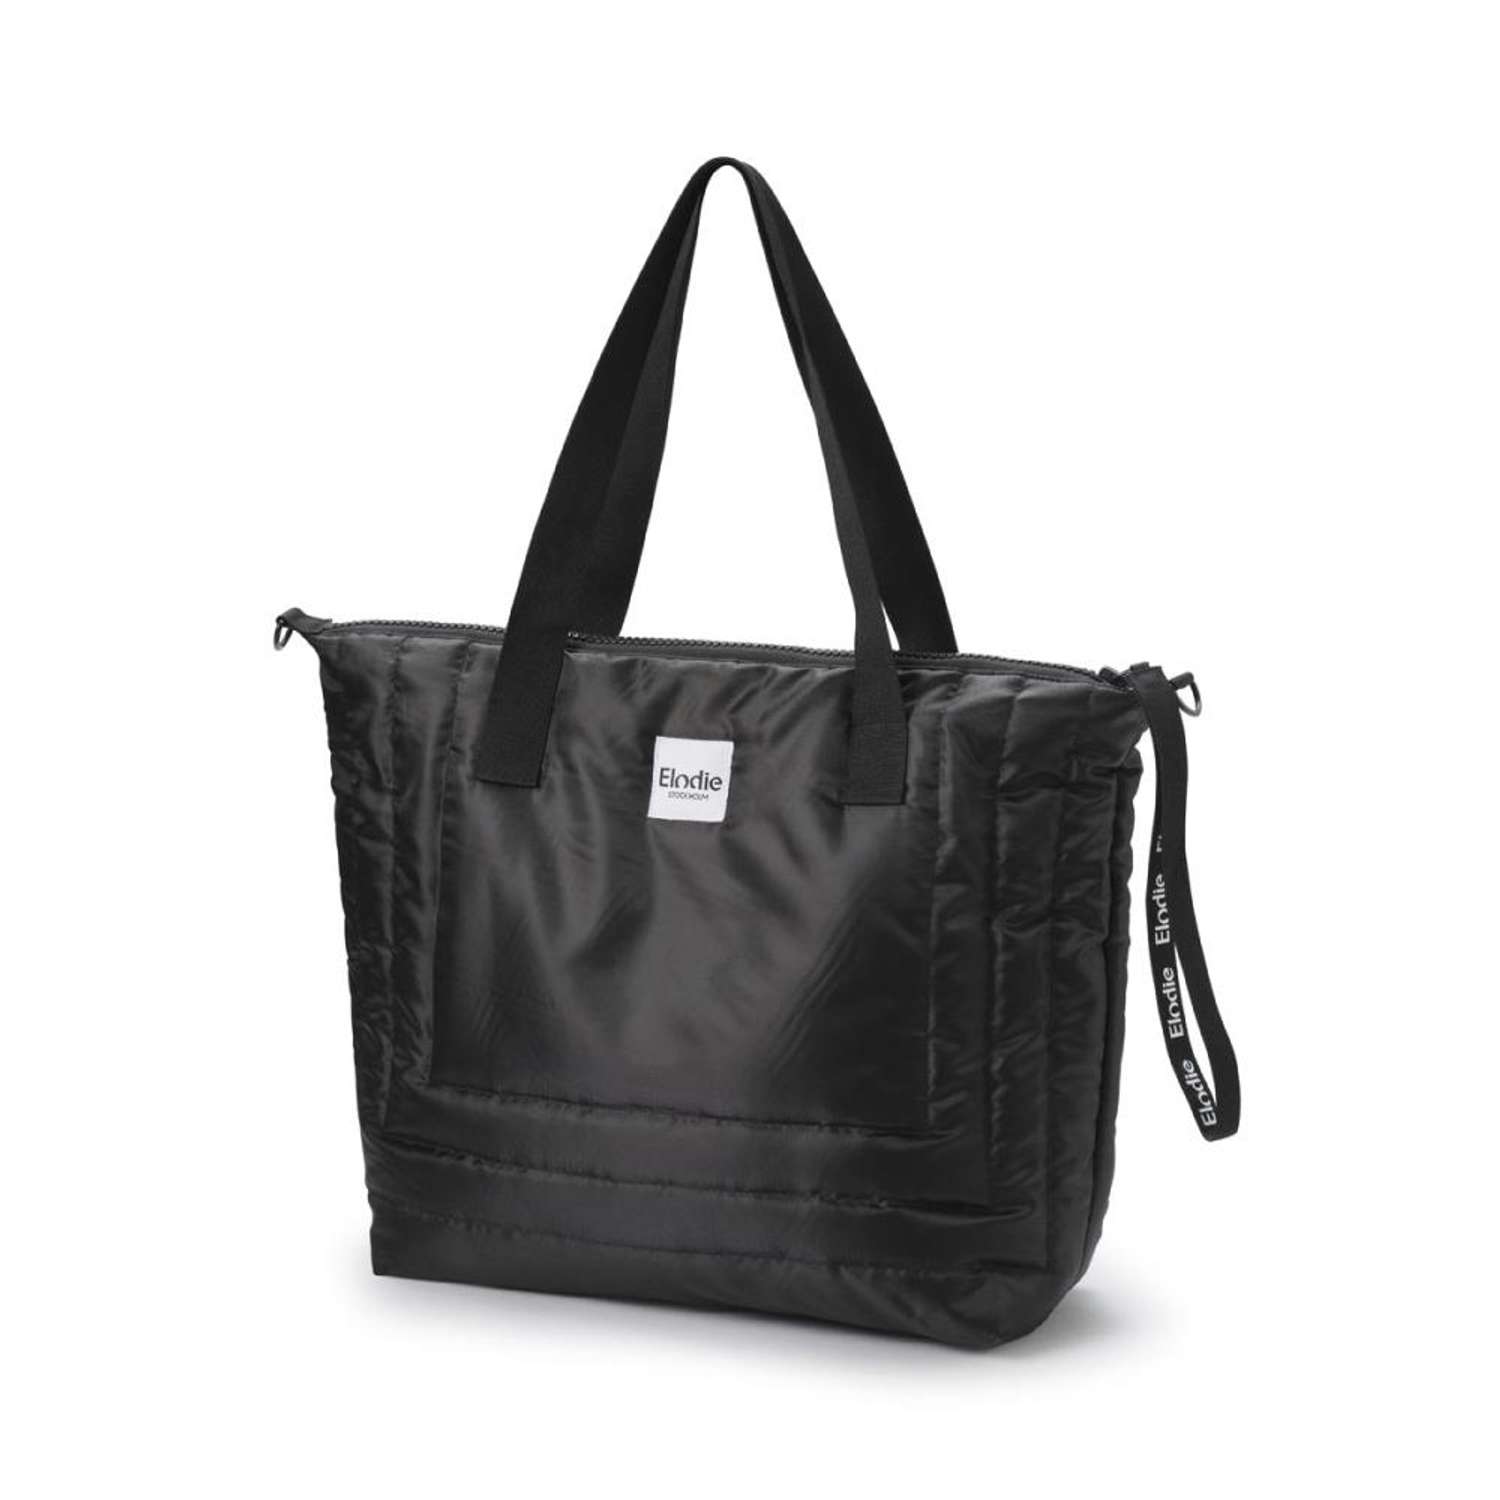 Сумка Elodie Changing Bag Quilted Black - фото 1